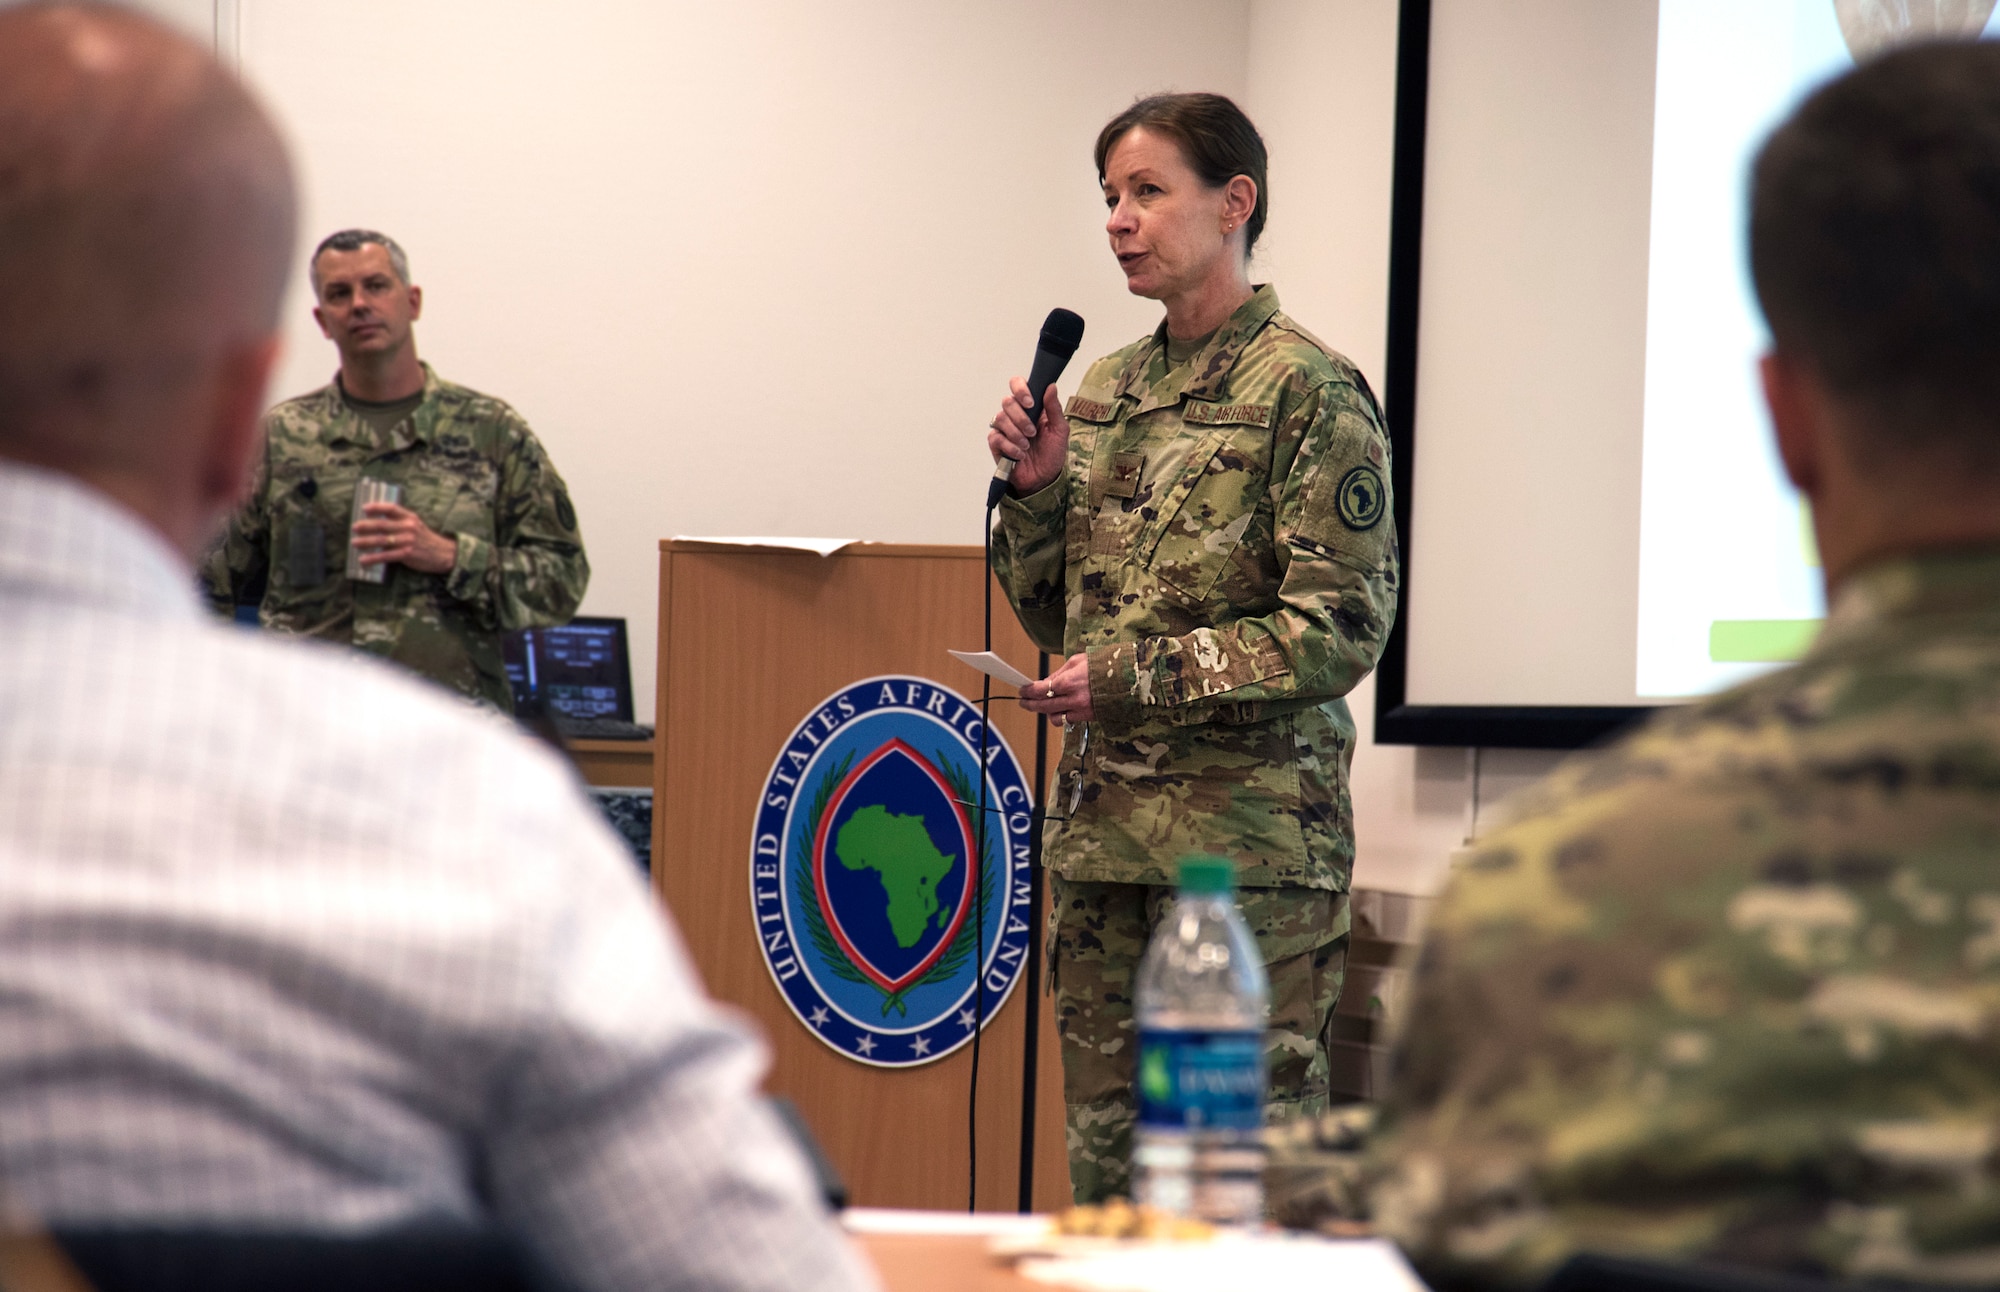 U.S. Air Force Col. Krystal Murphy, acting AFRICOM command surgeon, speaks to attendees of the 2019 U.S. Africa Command Command Surgeon Synchronization Conference in Stuttgart, Germany, May 28, 2019. Murphy talked about the importance of building relationships during the conference. (U.S. Navy photo by Mass Communication Specialist 1st Class Christopher Hurd)